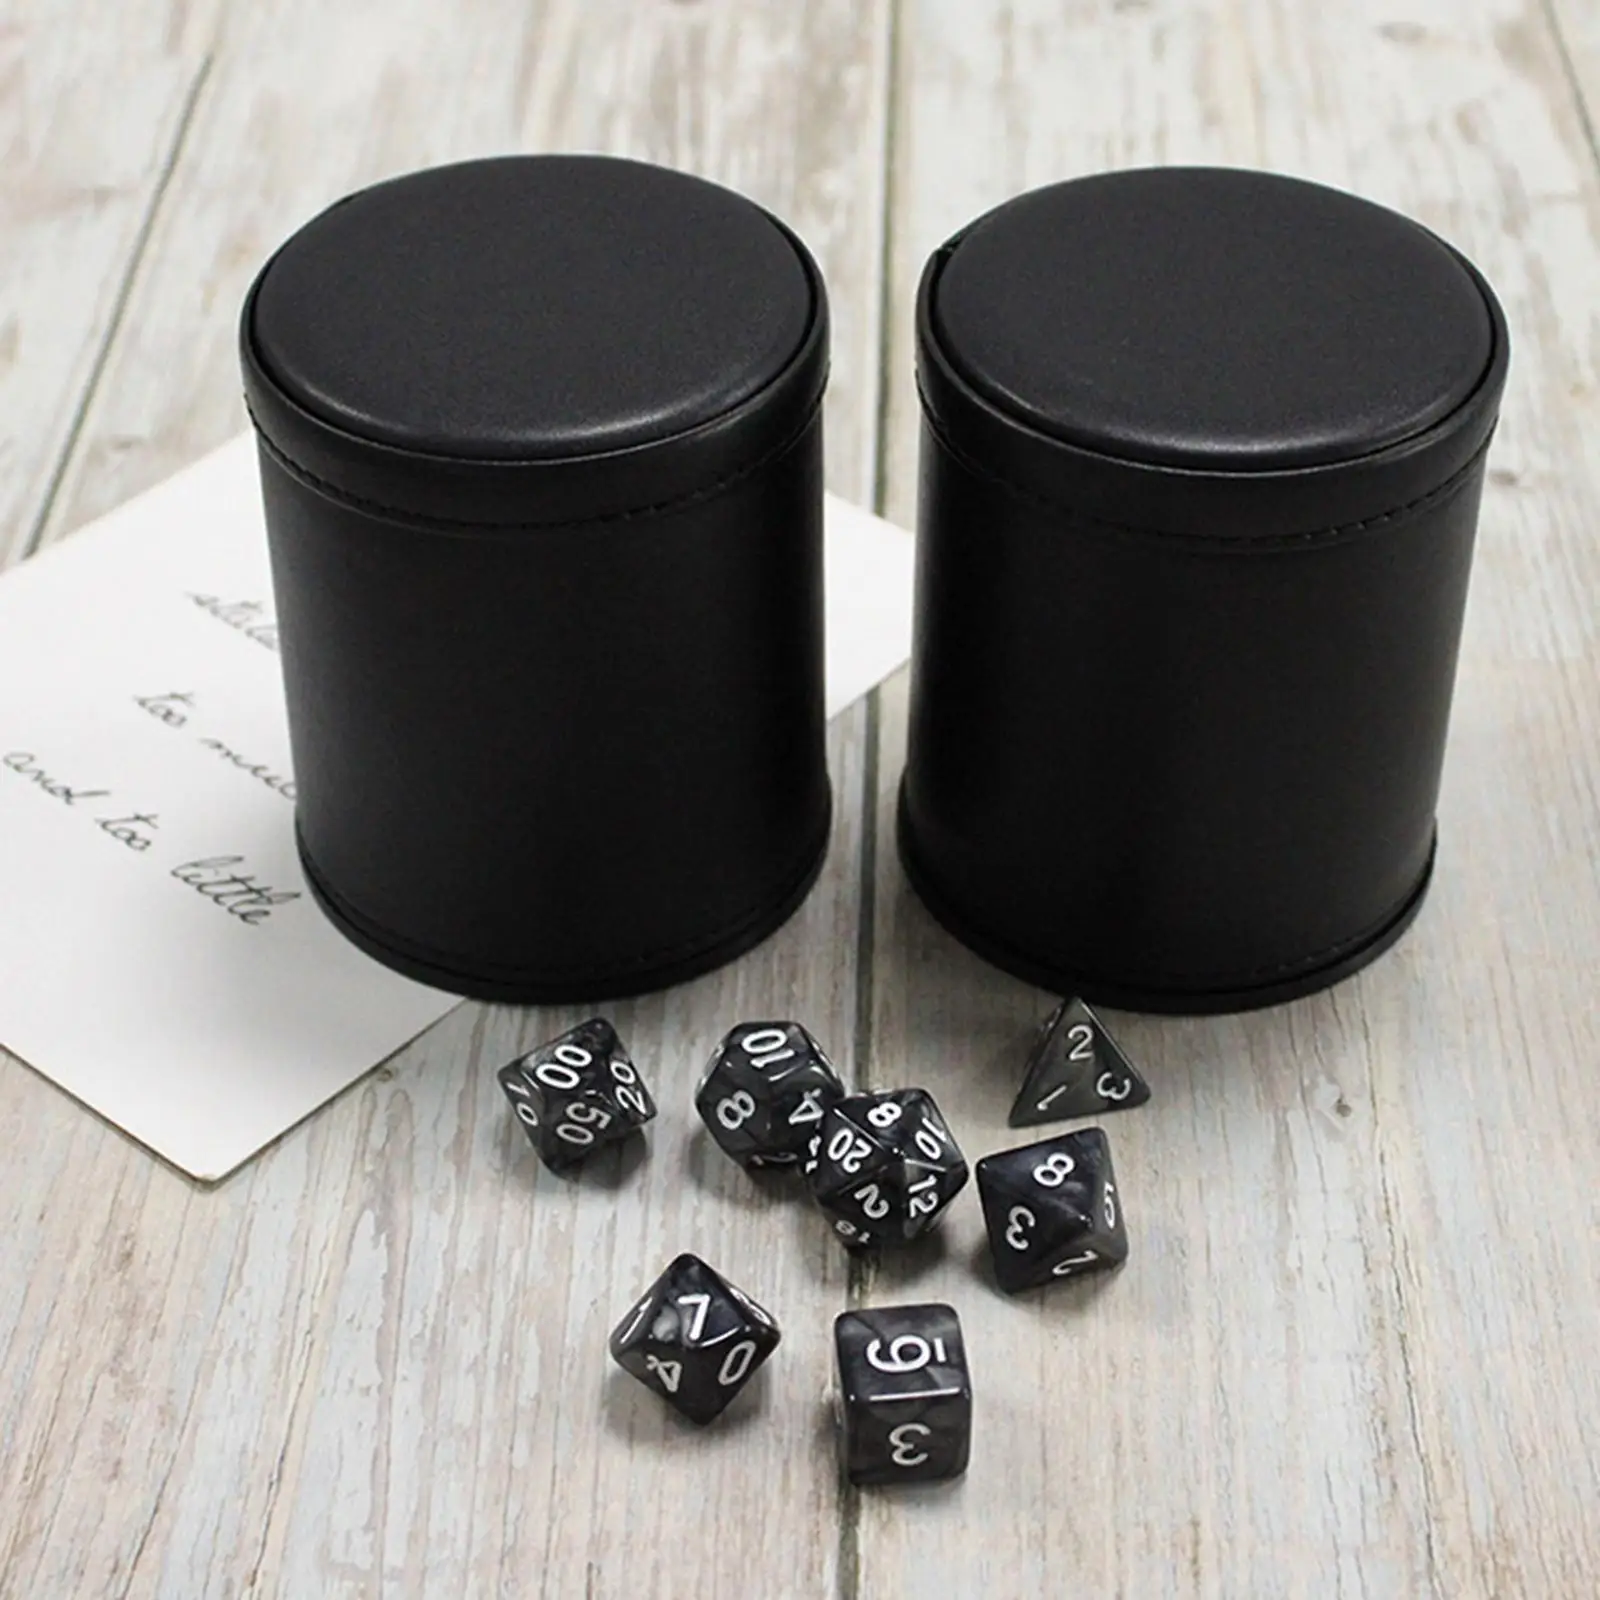 Manual Dice Cup Dice Game Accessories Professional Entertainment Leather Dice Shaker Dice Decider for Club Ktv Home Party Family